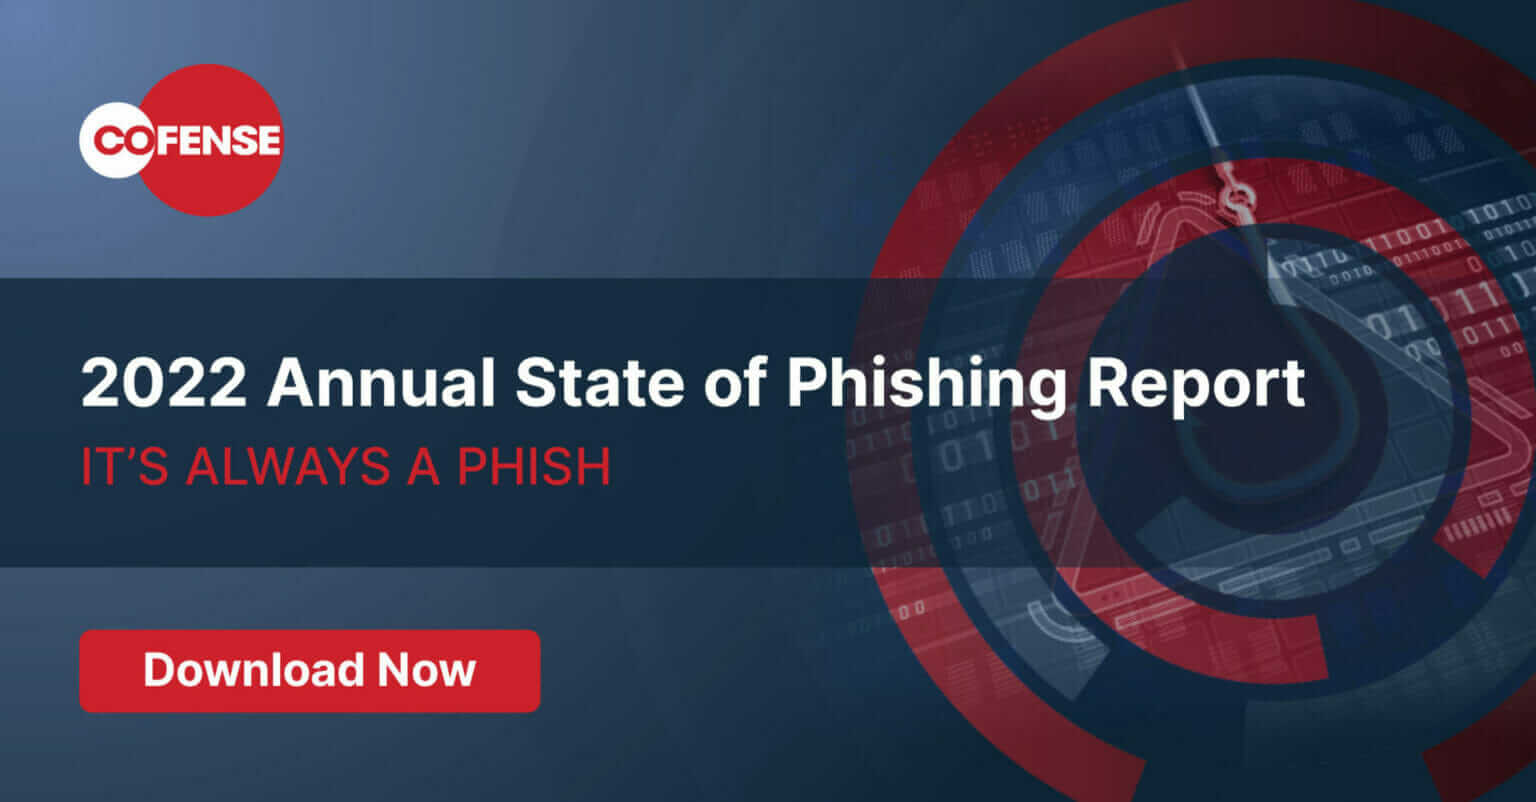 Phishing Training for Employees - Importance and Benefits